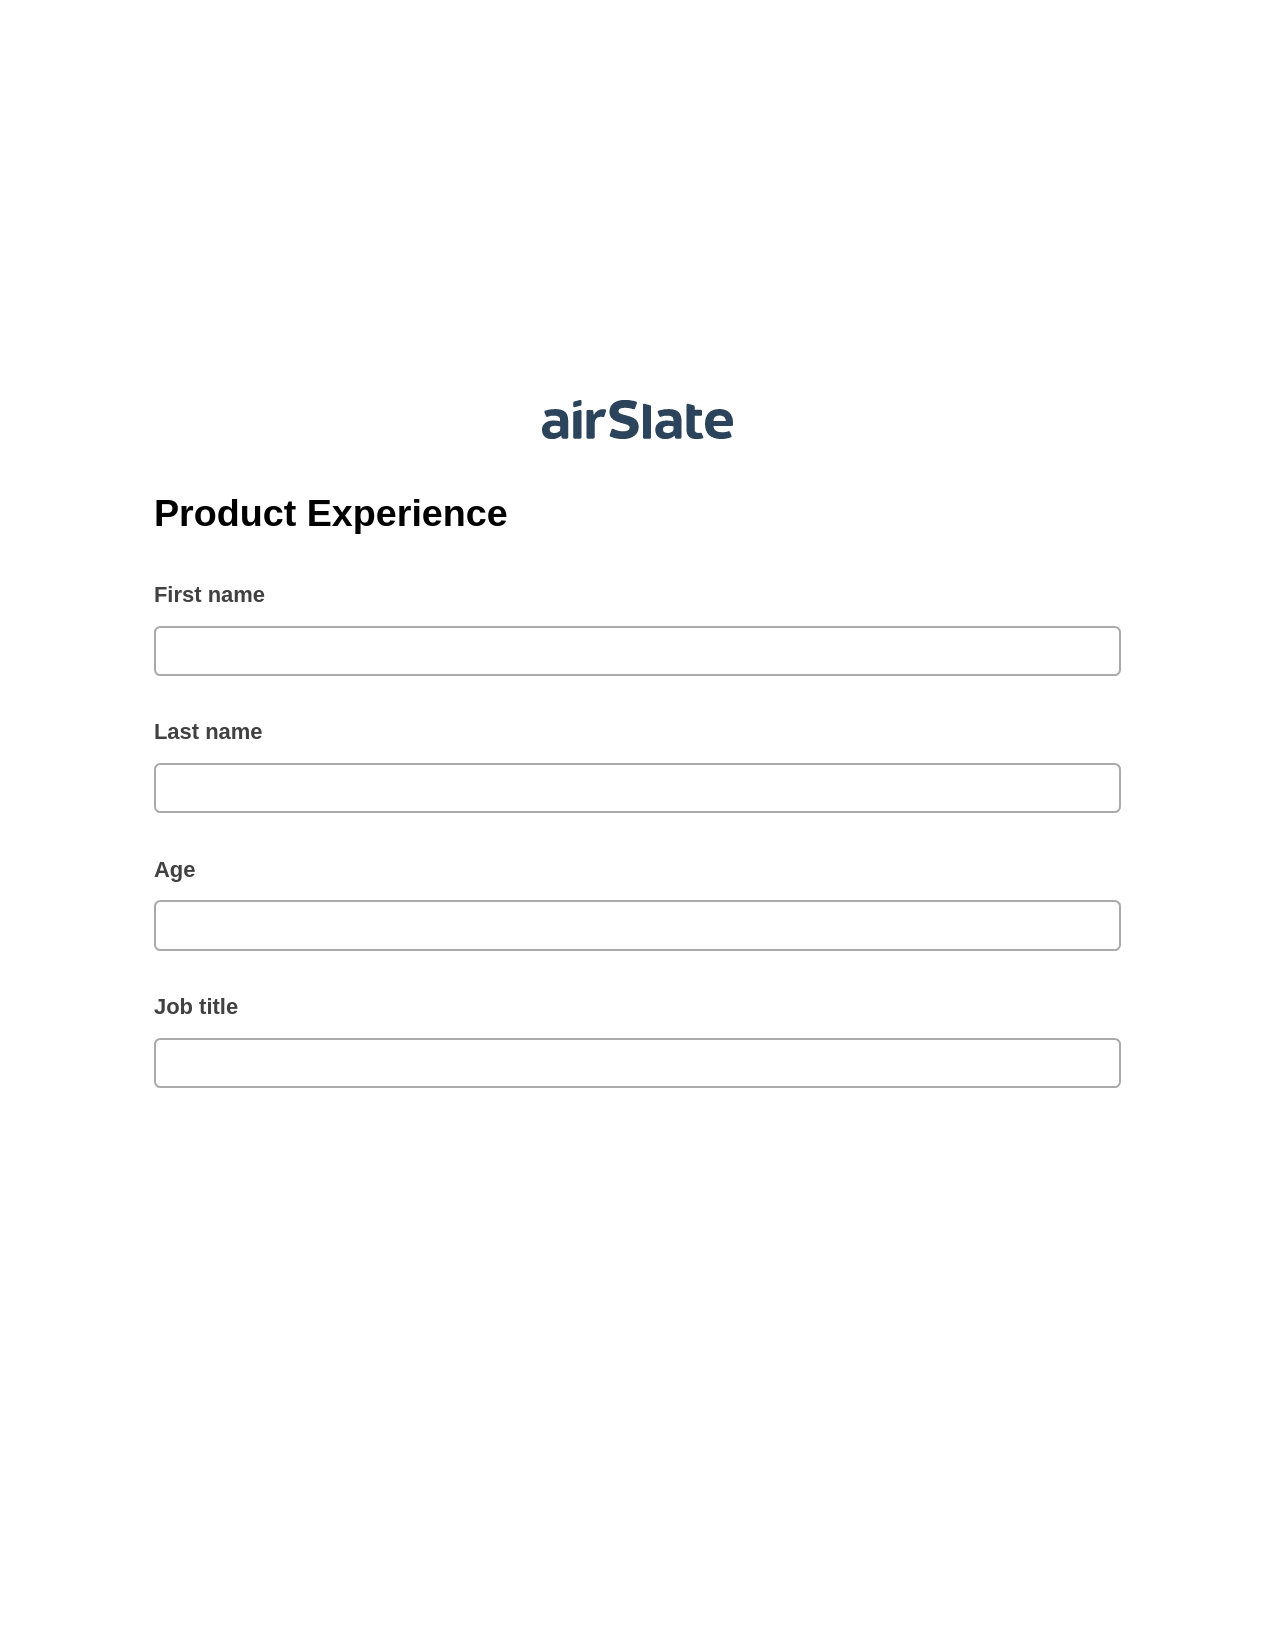 Product Experience Pre-fill from MS Dynamics 365 Records, Add Tags to Slate Bot, Archive to Dropbox Bot